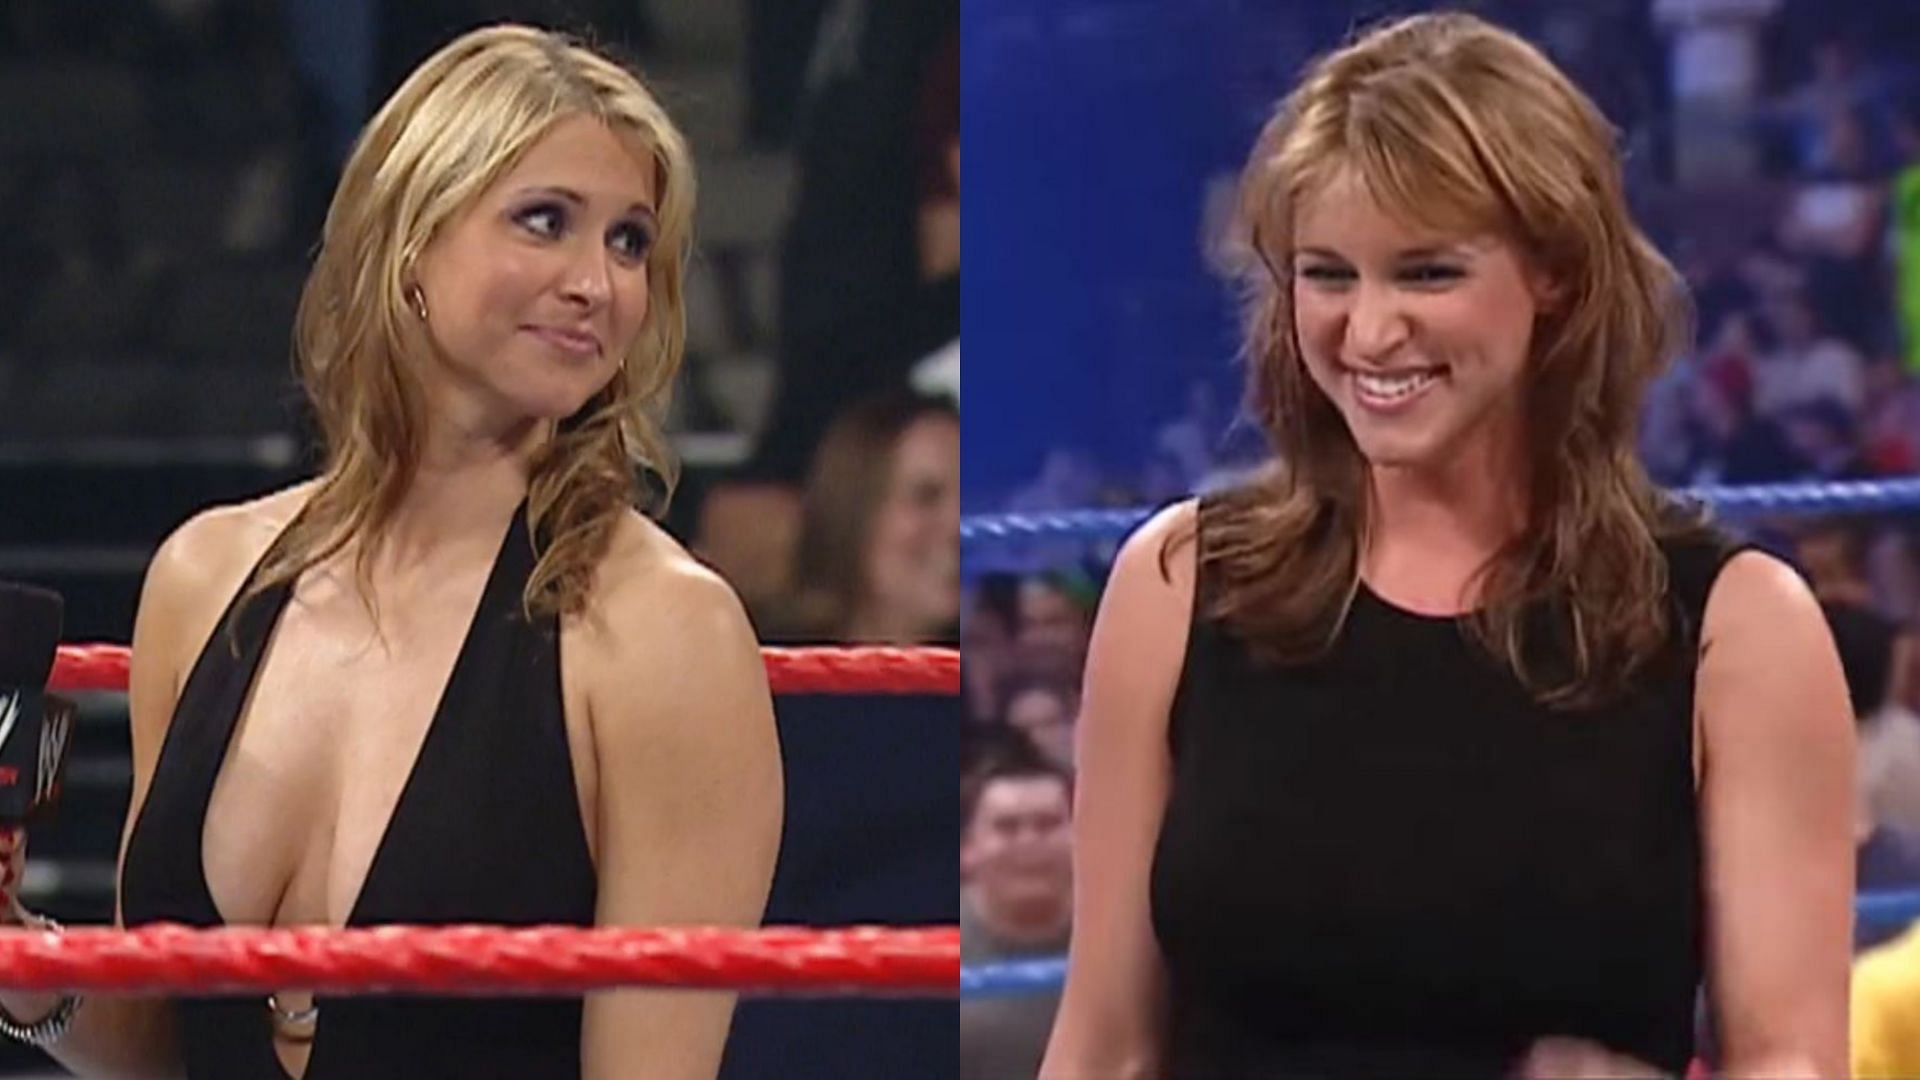 When WWE veteran refuted claims he had an affair with Stephanie McMahon pic